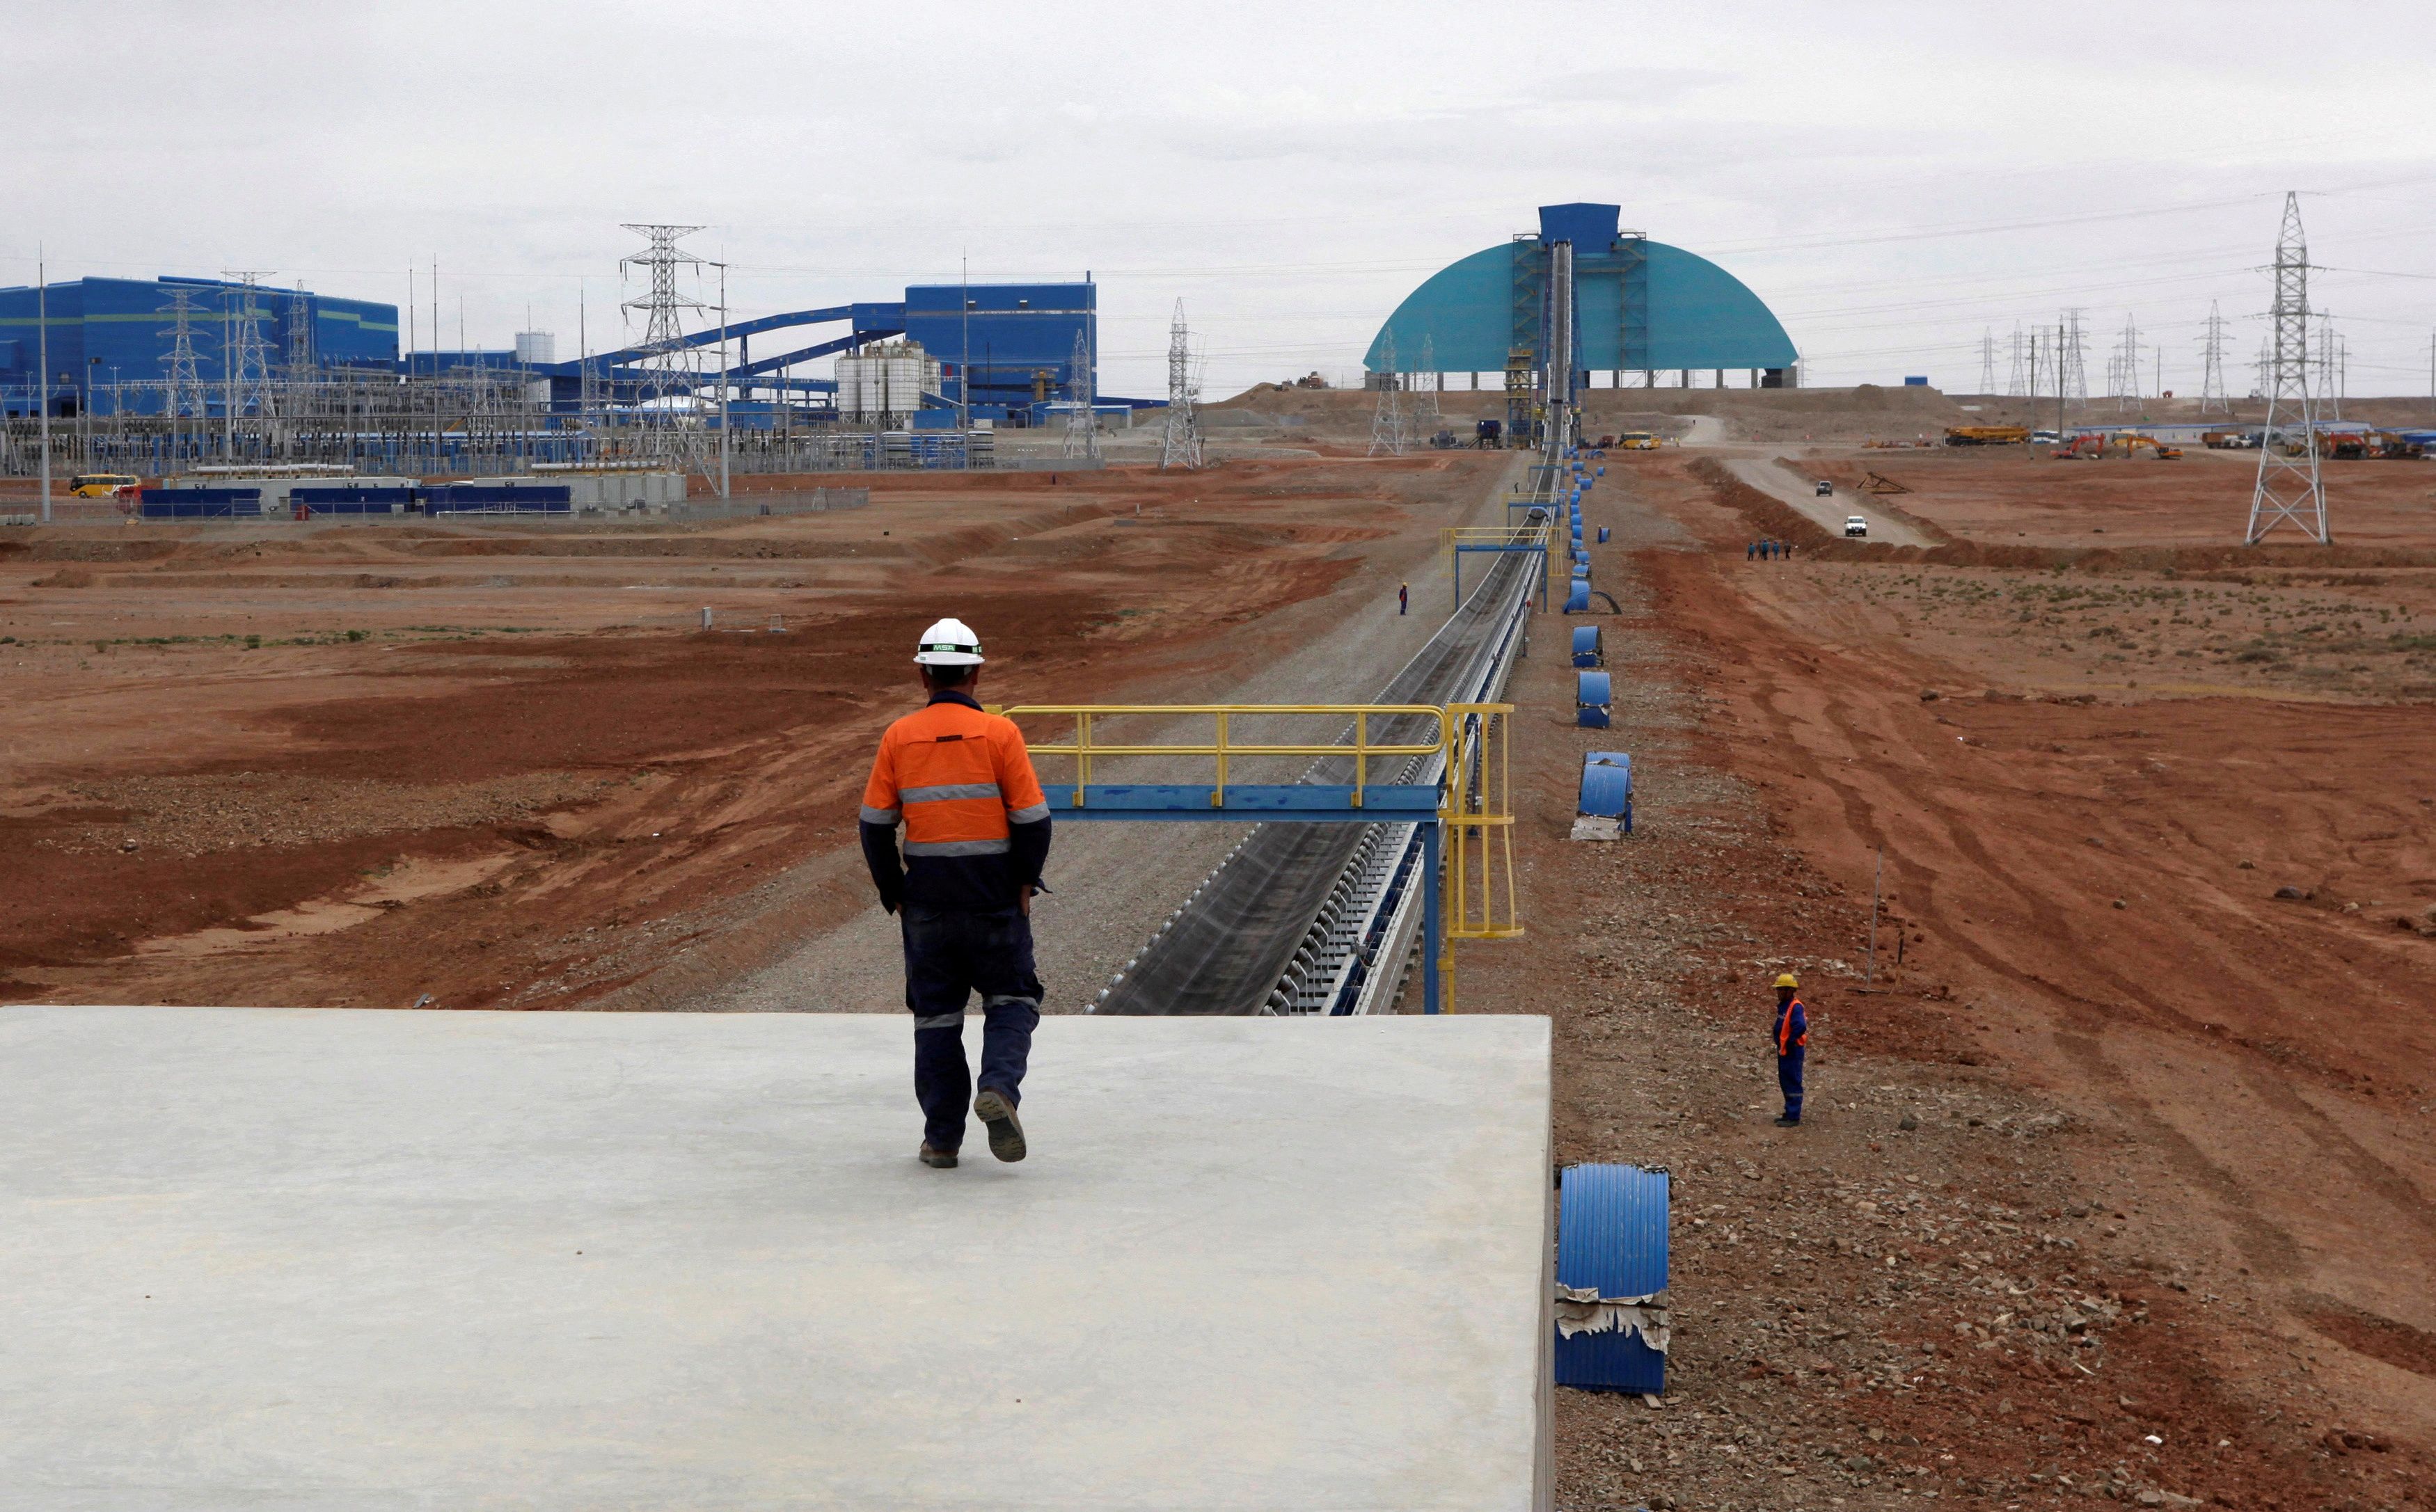 An employee looks at the Oyu Tolgoi mine in Mongolia's South Gobi region